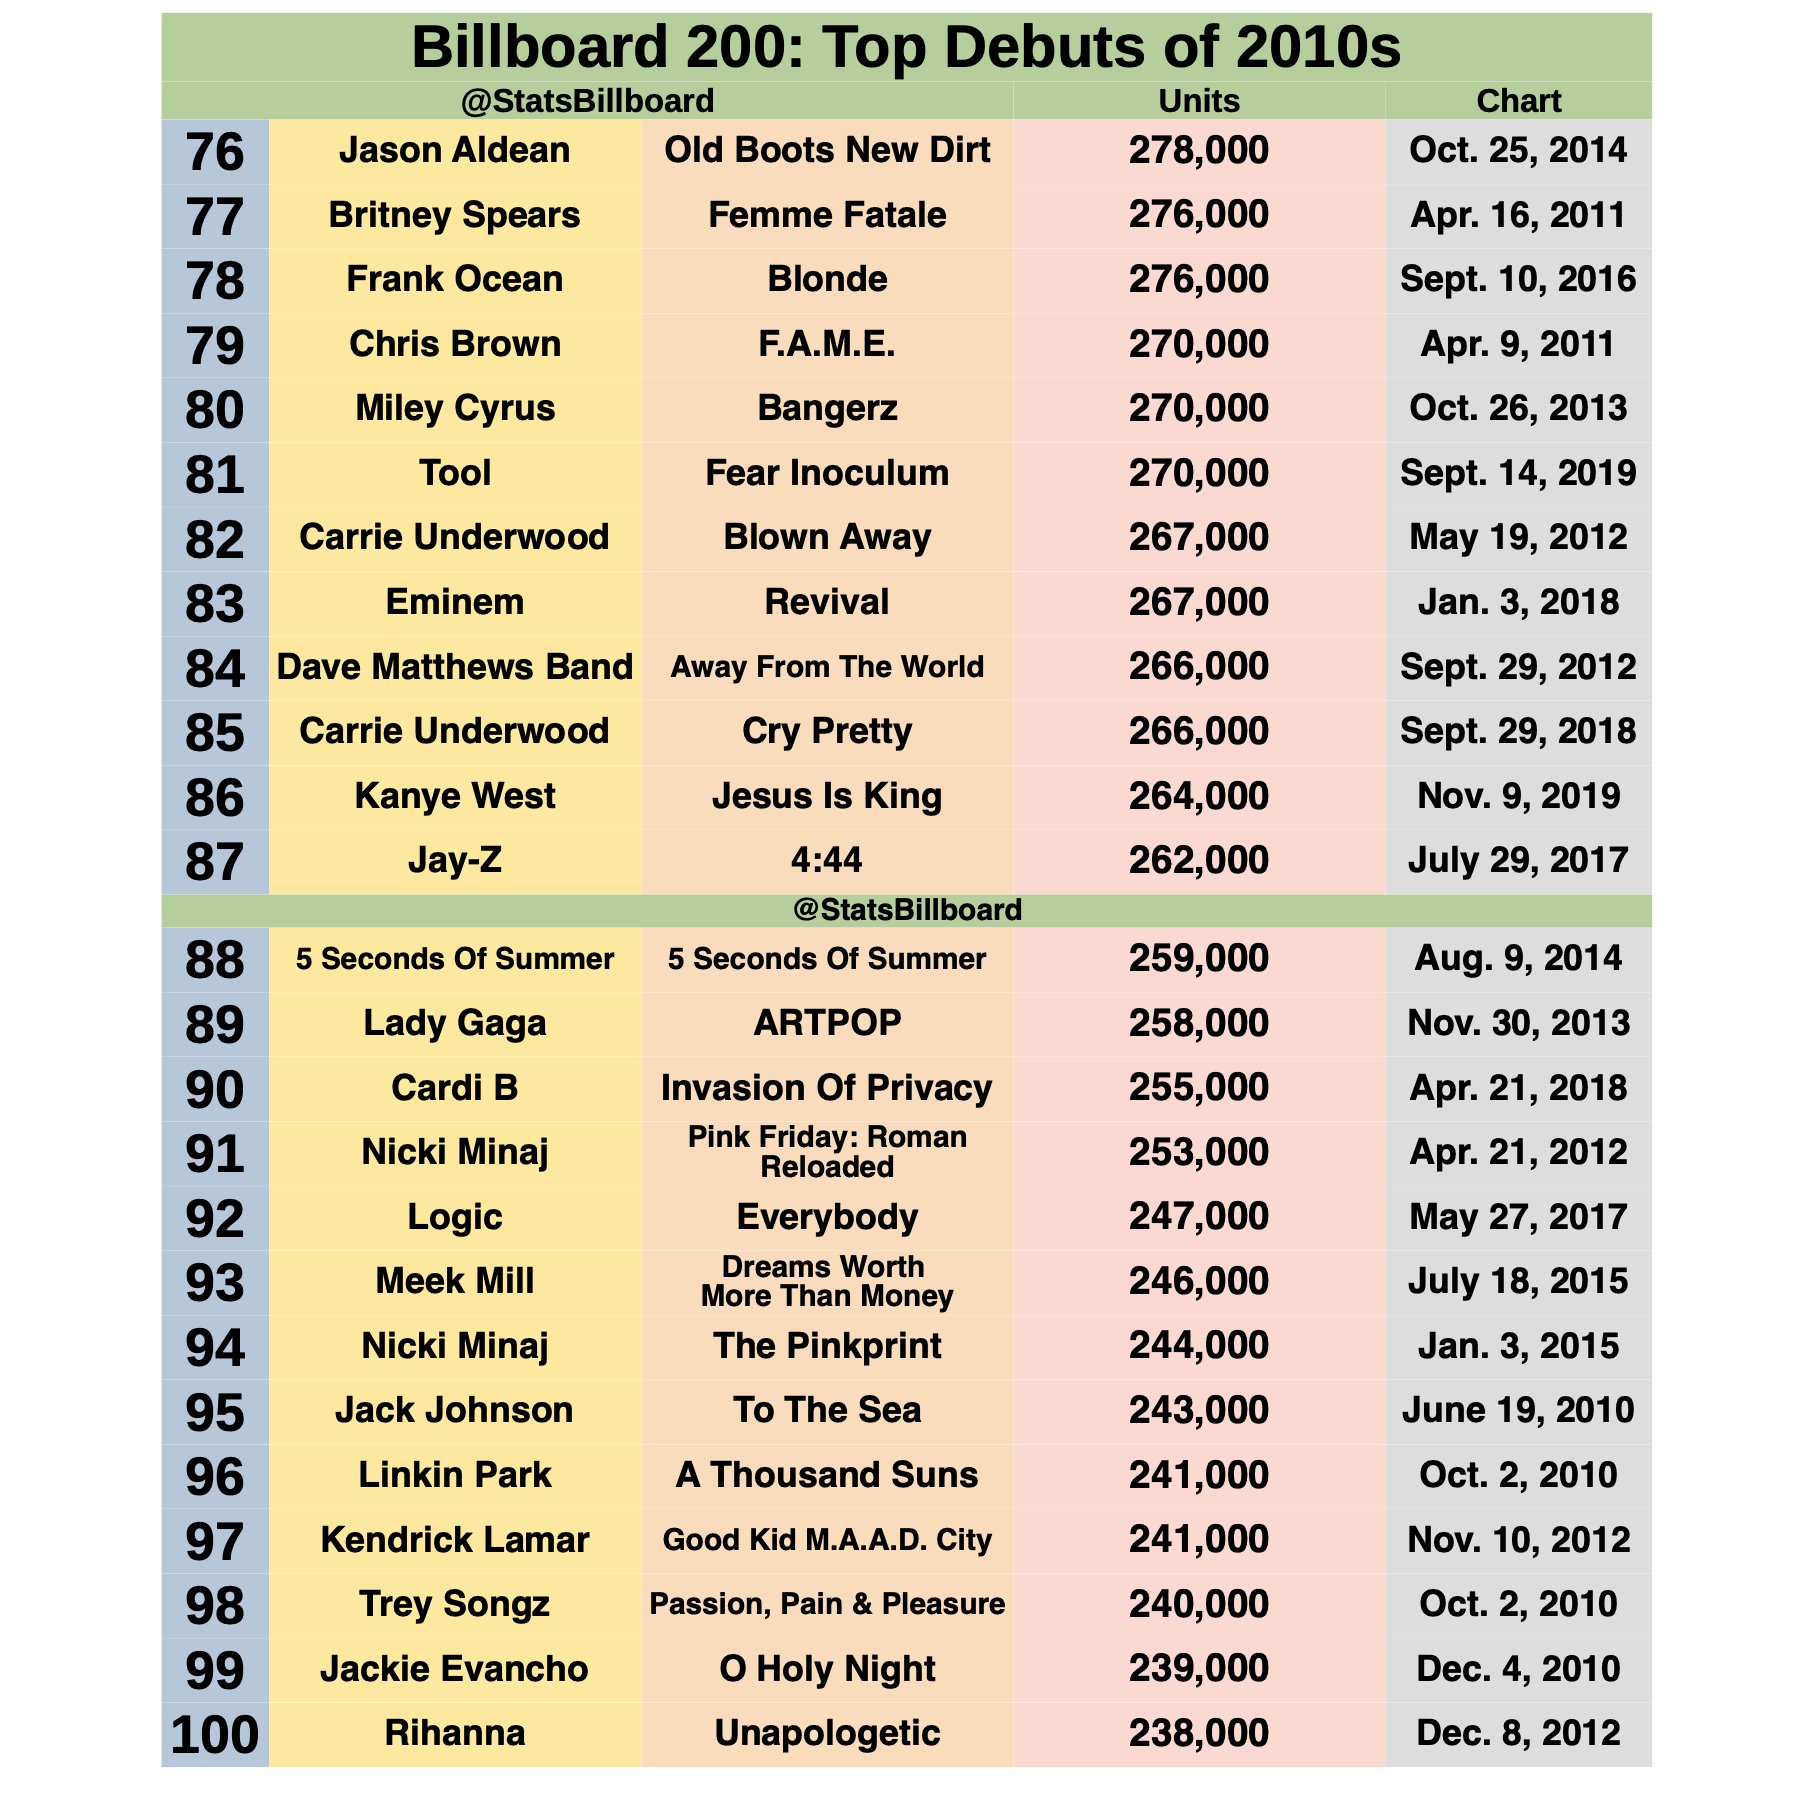 flise Normalisering boksning Billboard Stats & Projections on Twitter: "The highest first-week numbers  on the Billboard 200 albums chart during the 2010s decade. - @Adele reigns  supreme - @taylorswift13's consistency is unmatched - @Drake has